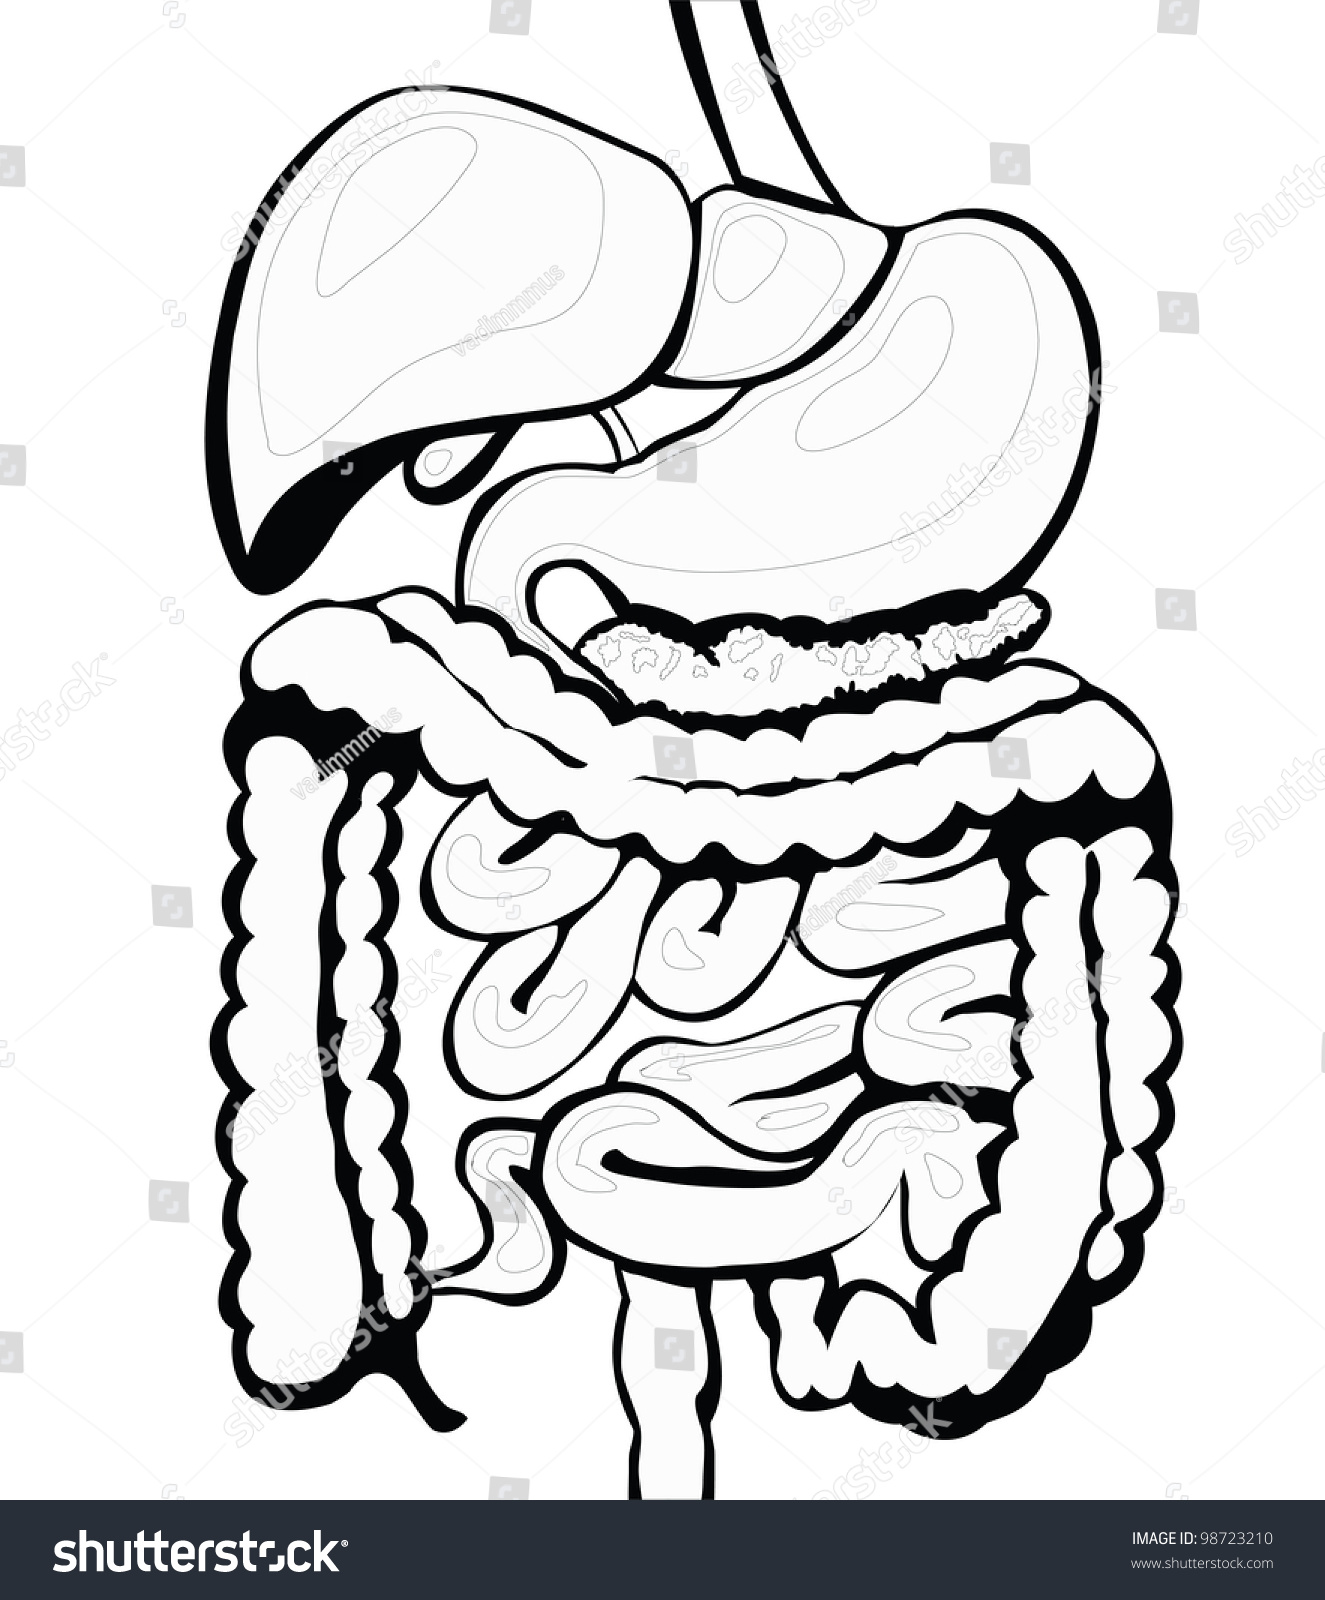 Digestive System Black White Separate Layers Stock Vector 98723210